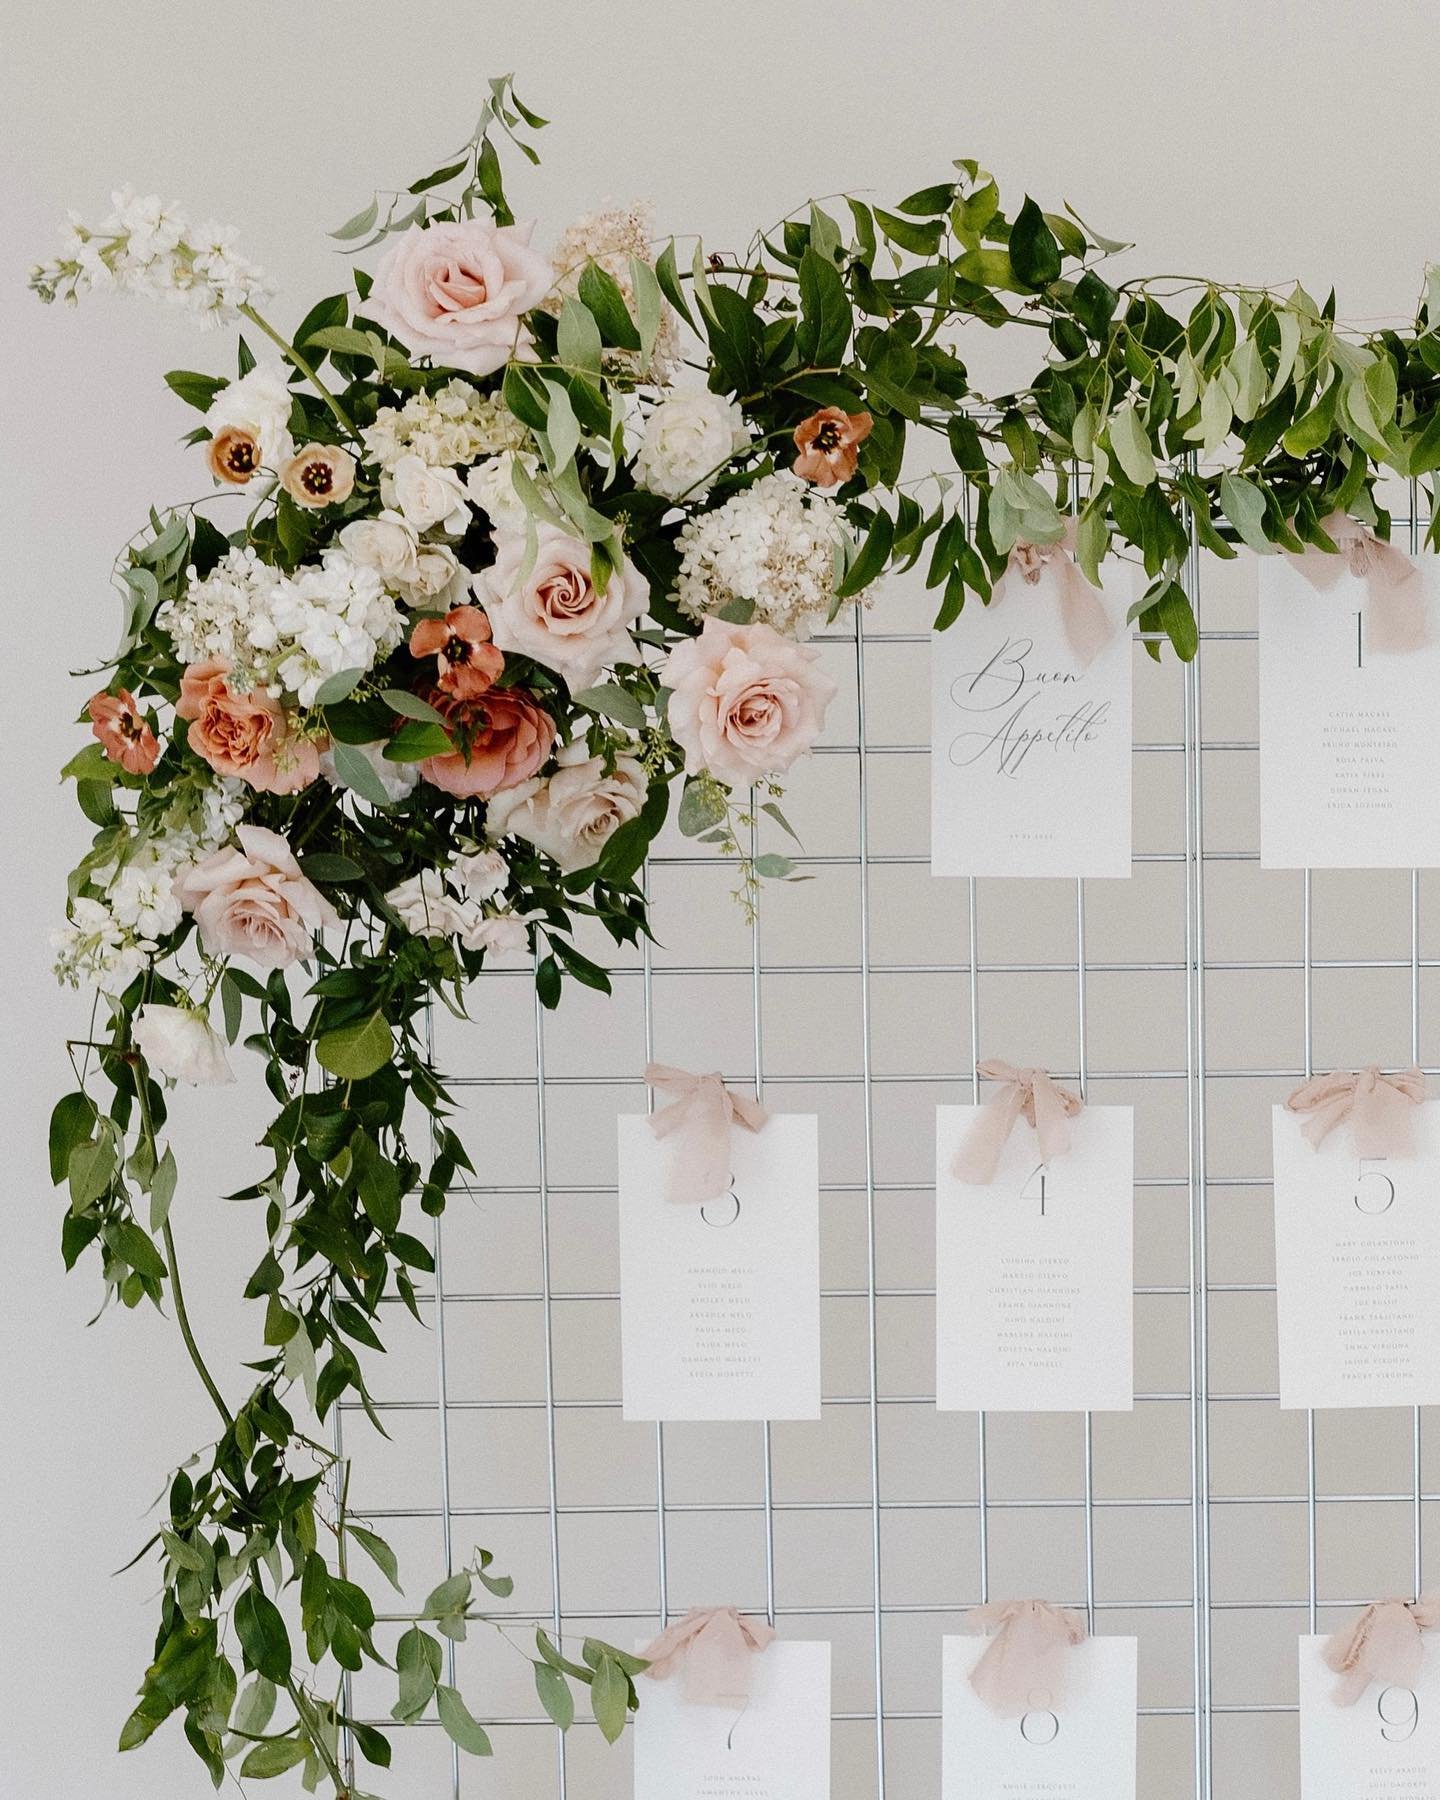 Thrilled to unveil the highlights of K &amp; A&rsquo;s wedding, infused with the essence of Italian romance. Let&rsquo;s begin with their stunning seating chart arrangement: soft cotton papers adorned with chiffon bows guide guests to their seats, th